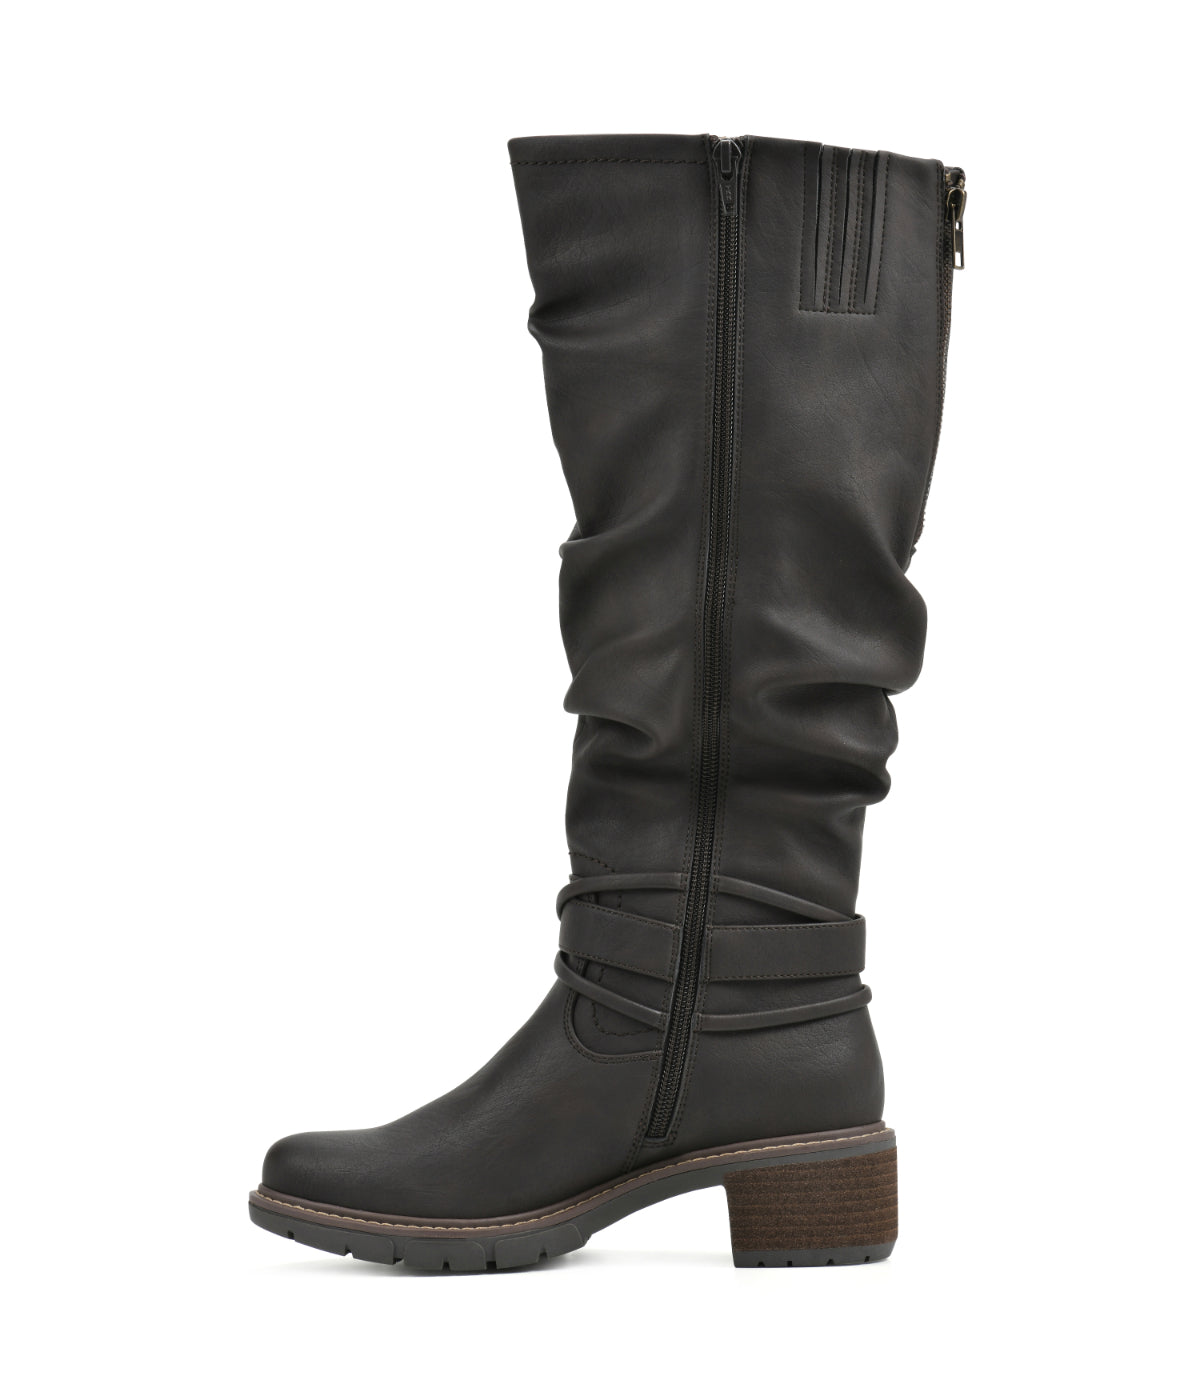 Crammers Tall Wide Calf Boots Dark.Brown/Smooth